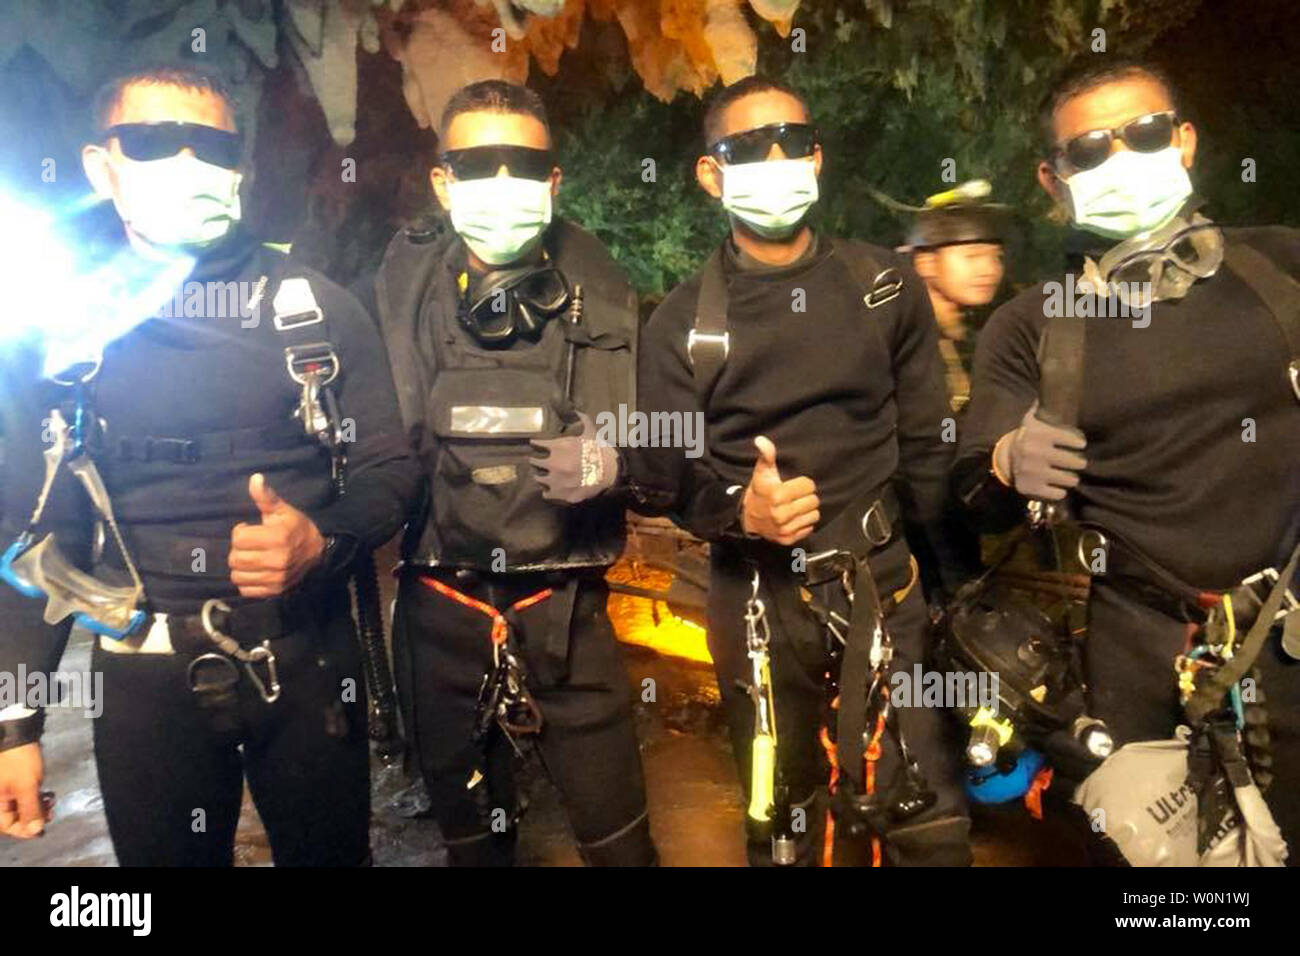 Four members of the Royal Thai Navy SEALS give a thumbs-up after rescuing 12 schoolboys, members of a local soccer team, and their coach, who were trapped in the Tham Luang Cave network in Northern Thailand. The 13 individuals had been trapped in the cave system for 18 days, their escape hampered and delayed by rising waters. Photo by Royal Thai Navy SEALS/UPI Stock Photo